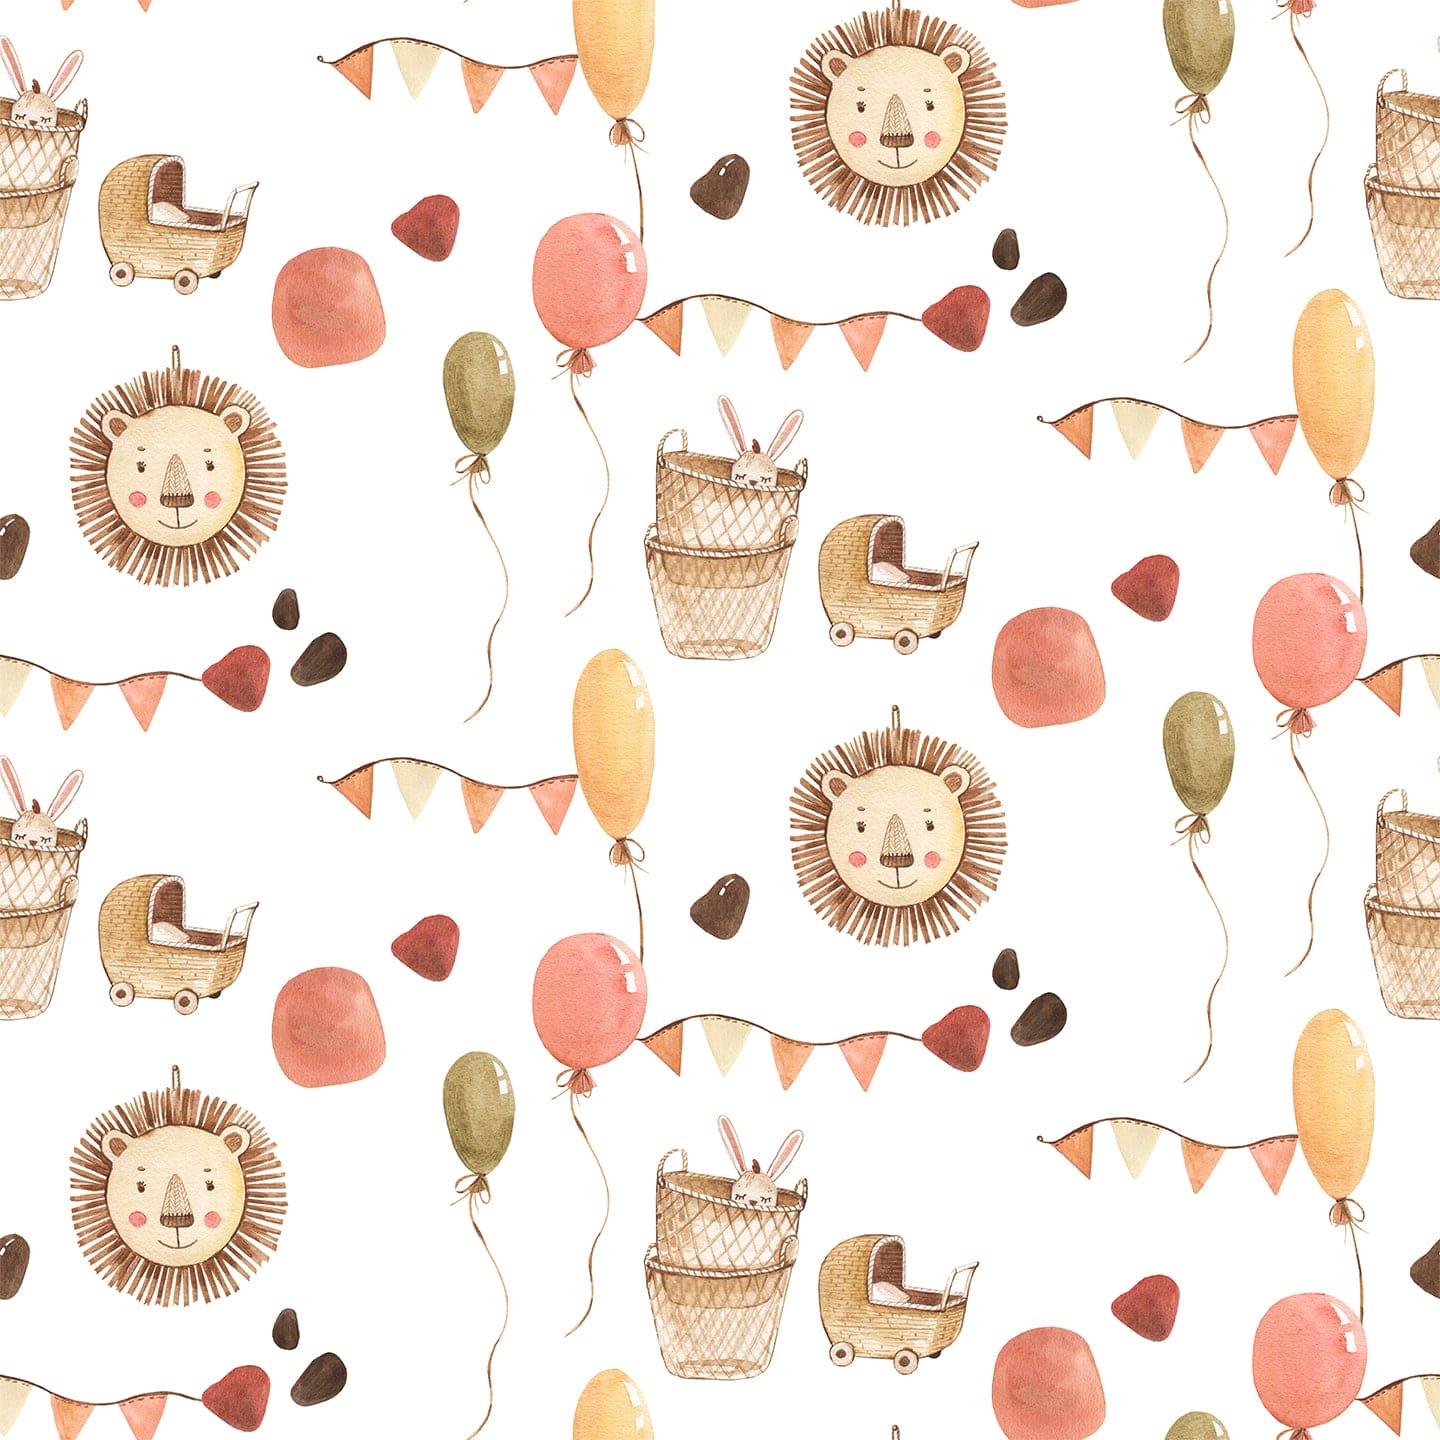 Seamless pattern featuring a charming children's wallpaper design with whimsical motifs of lions, rabbits in baskets, strollers, balloons, and bunting flags in a soft, watercolor style. The colors are gentle earth tones, creating a playful yet calm nursery atmosphere.